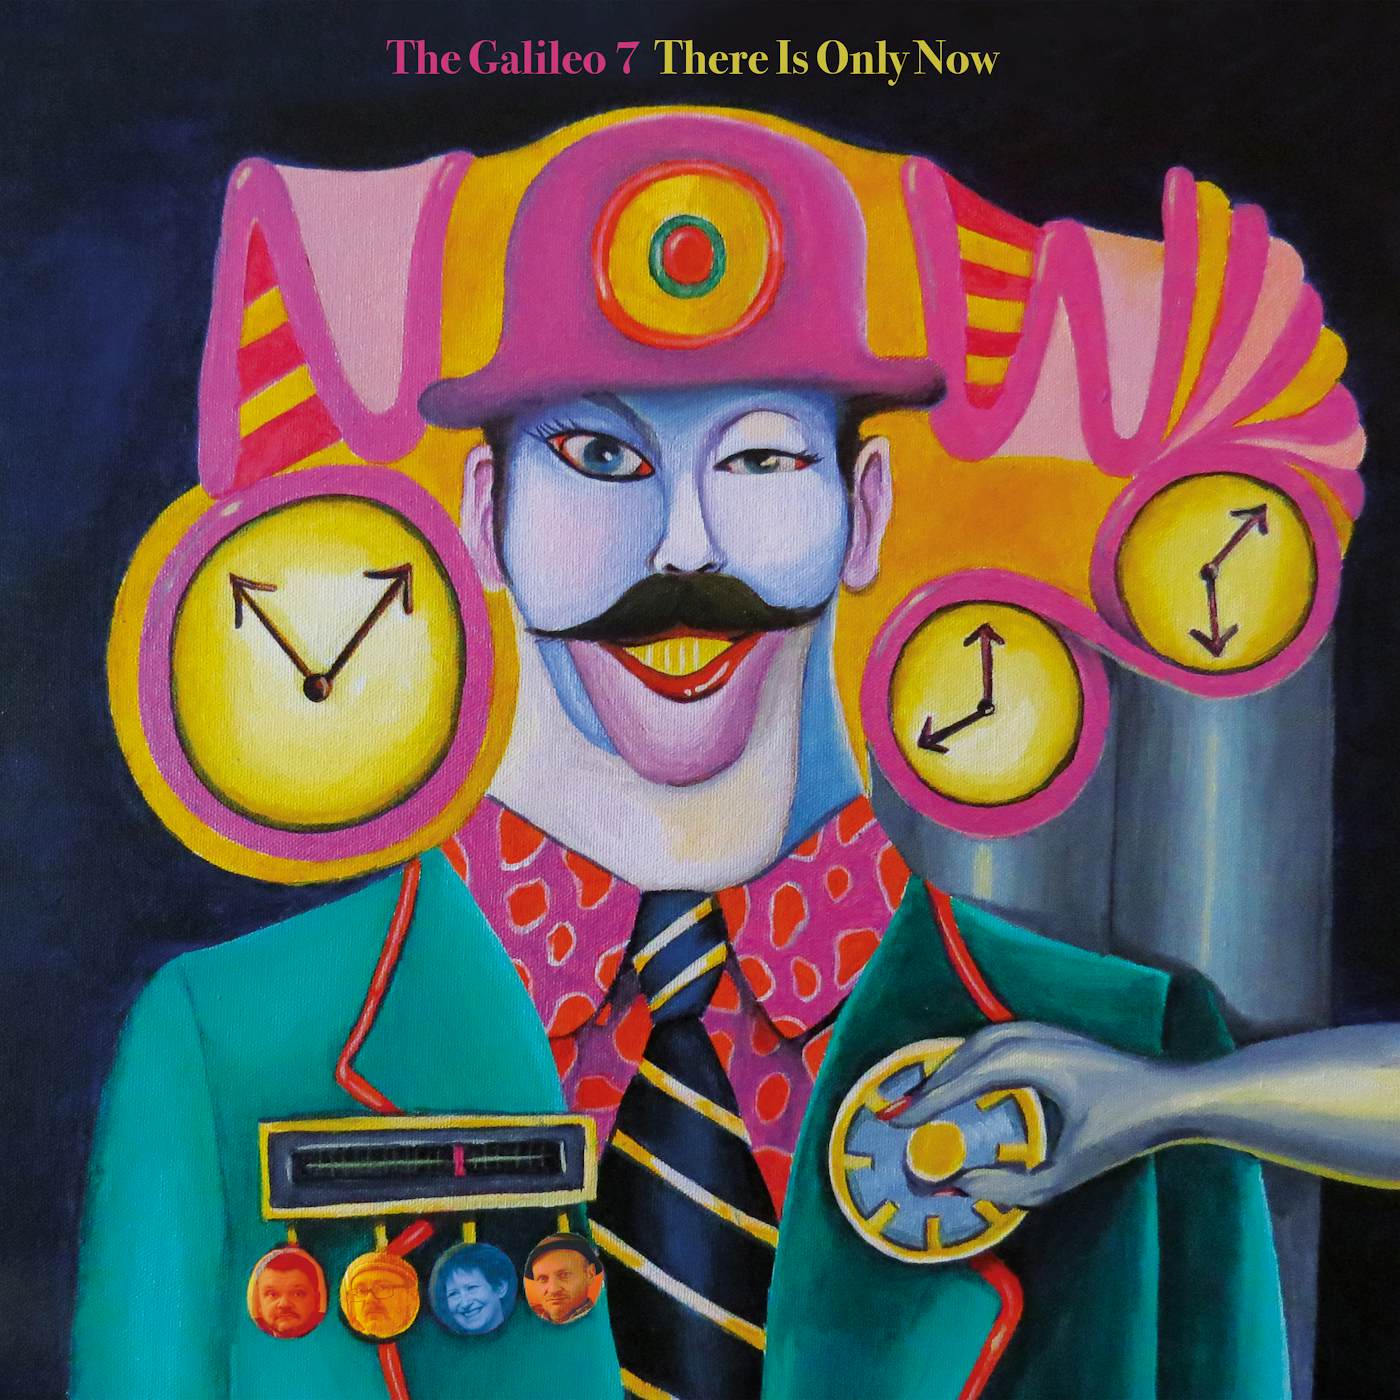 The Galileo 7 THERE IS ONLY NOW CD